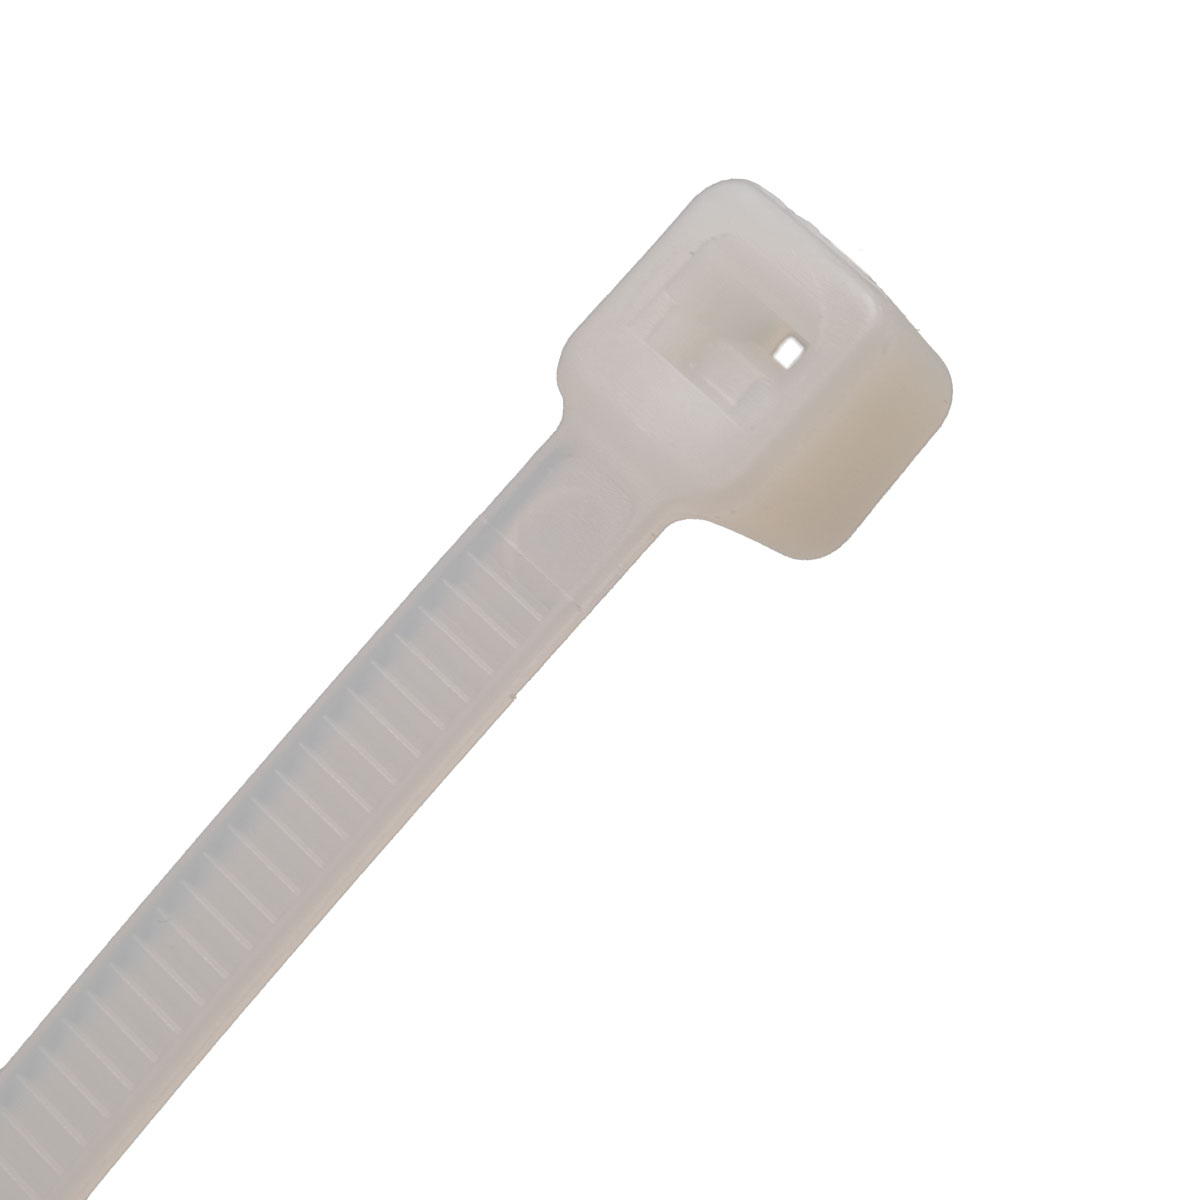 3.6x300mm Natural, Nylon 66 cable tie